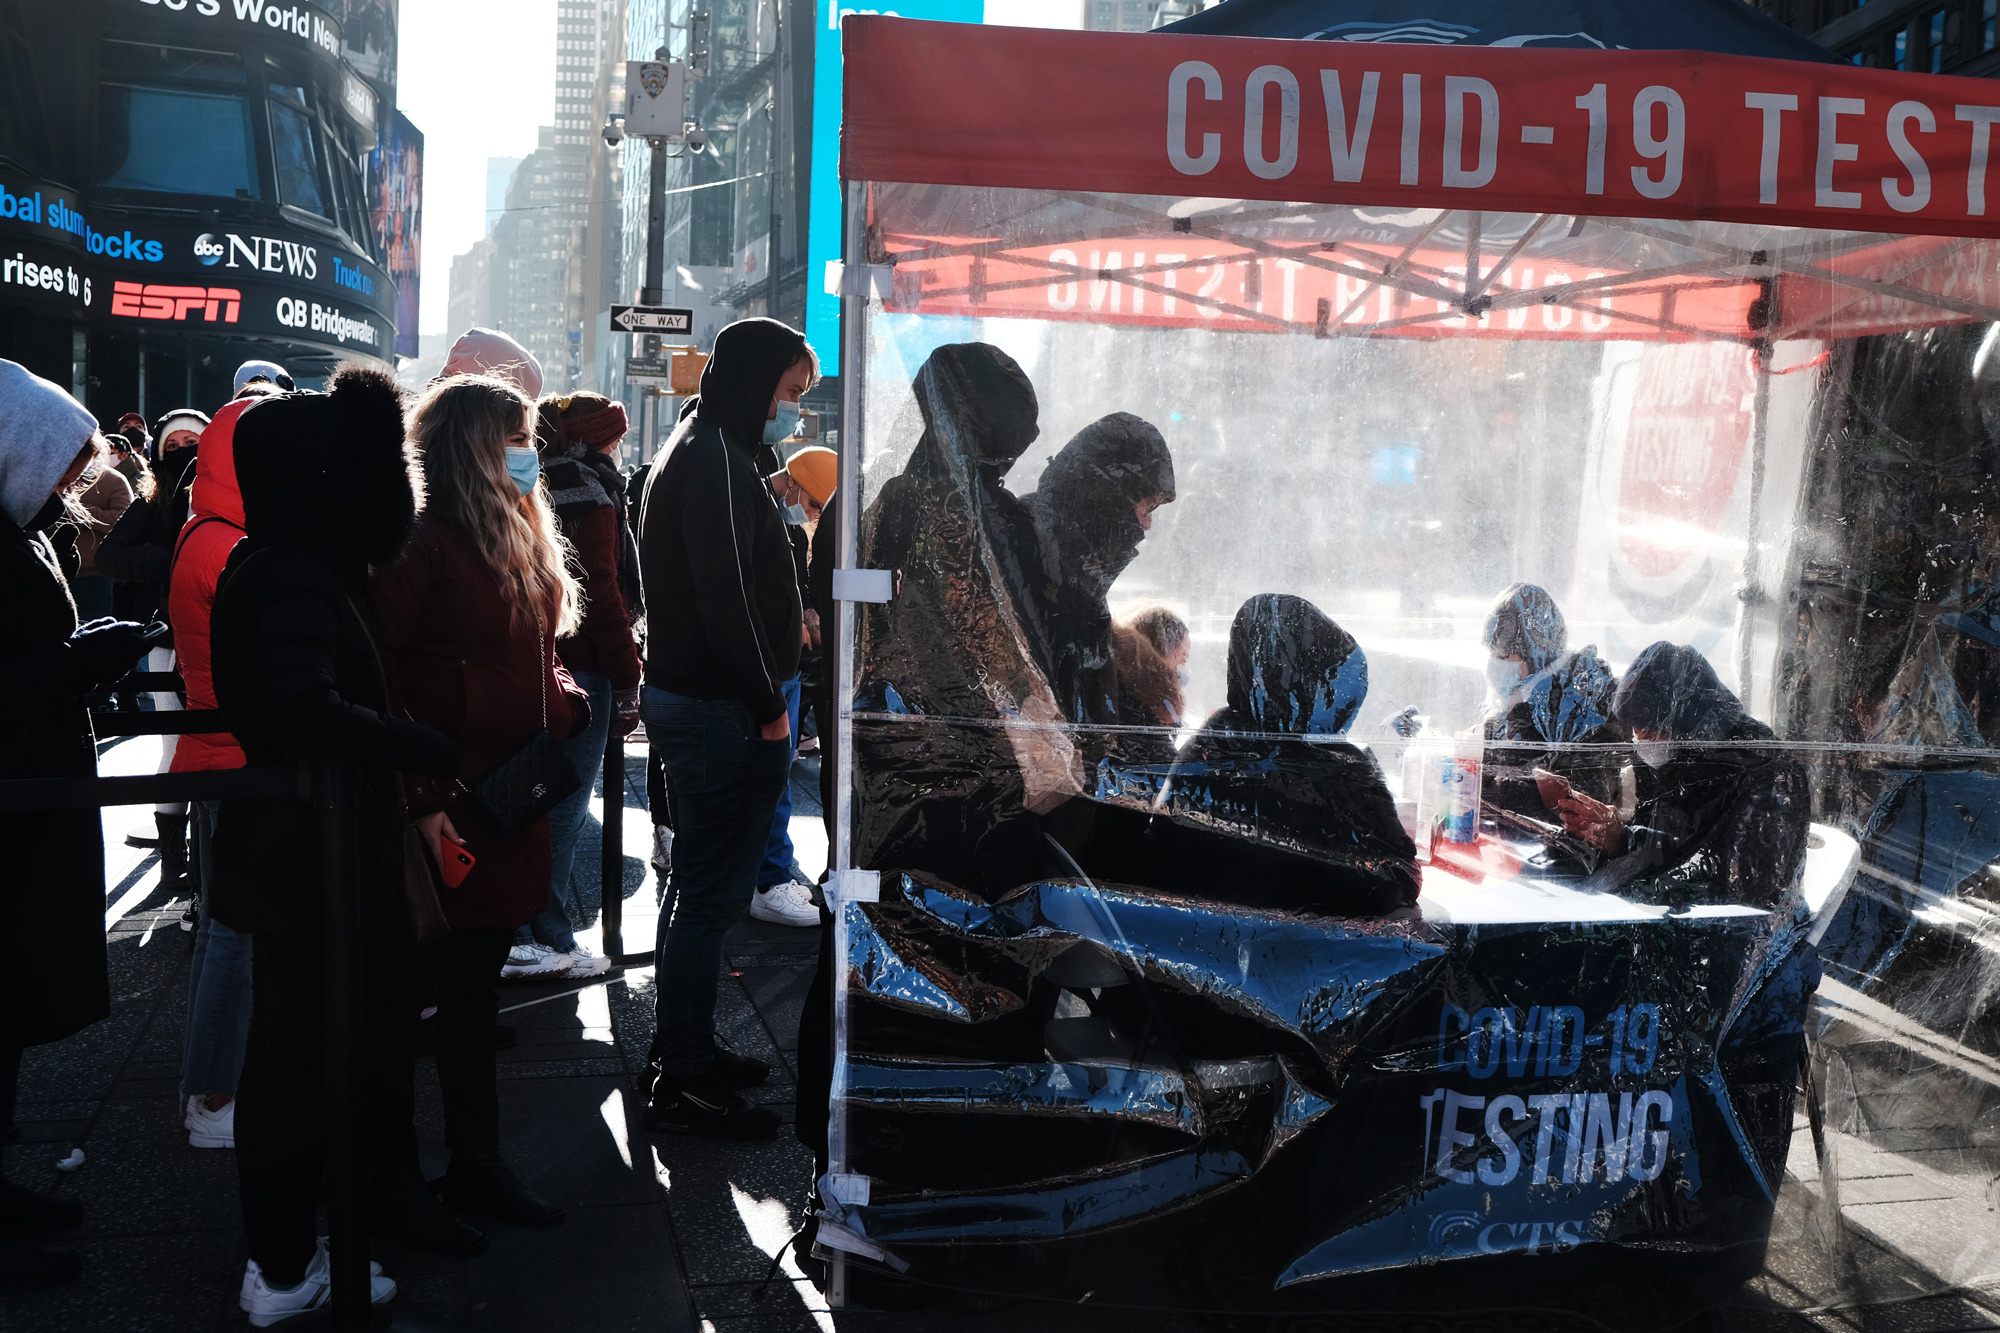 People wait in line at Times Square to get tested for Covid-19 on December 20, in New York City. 